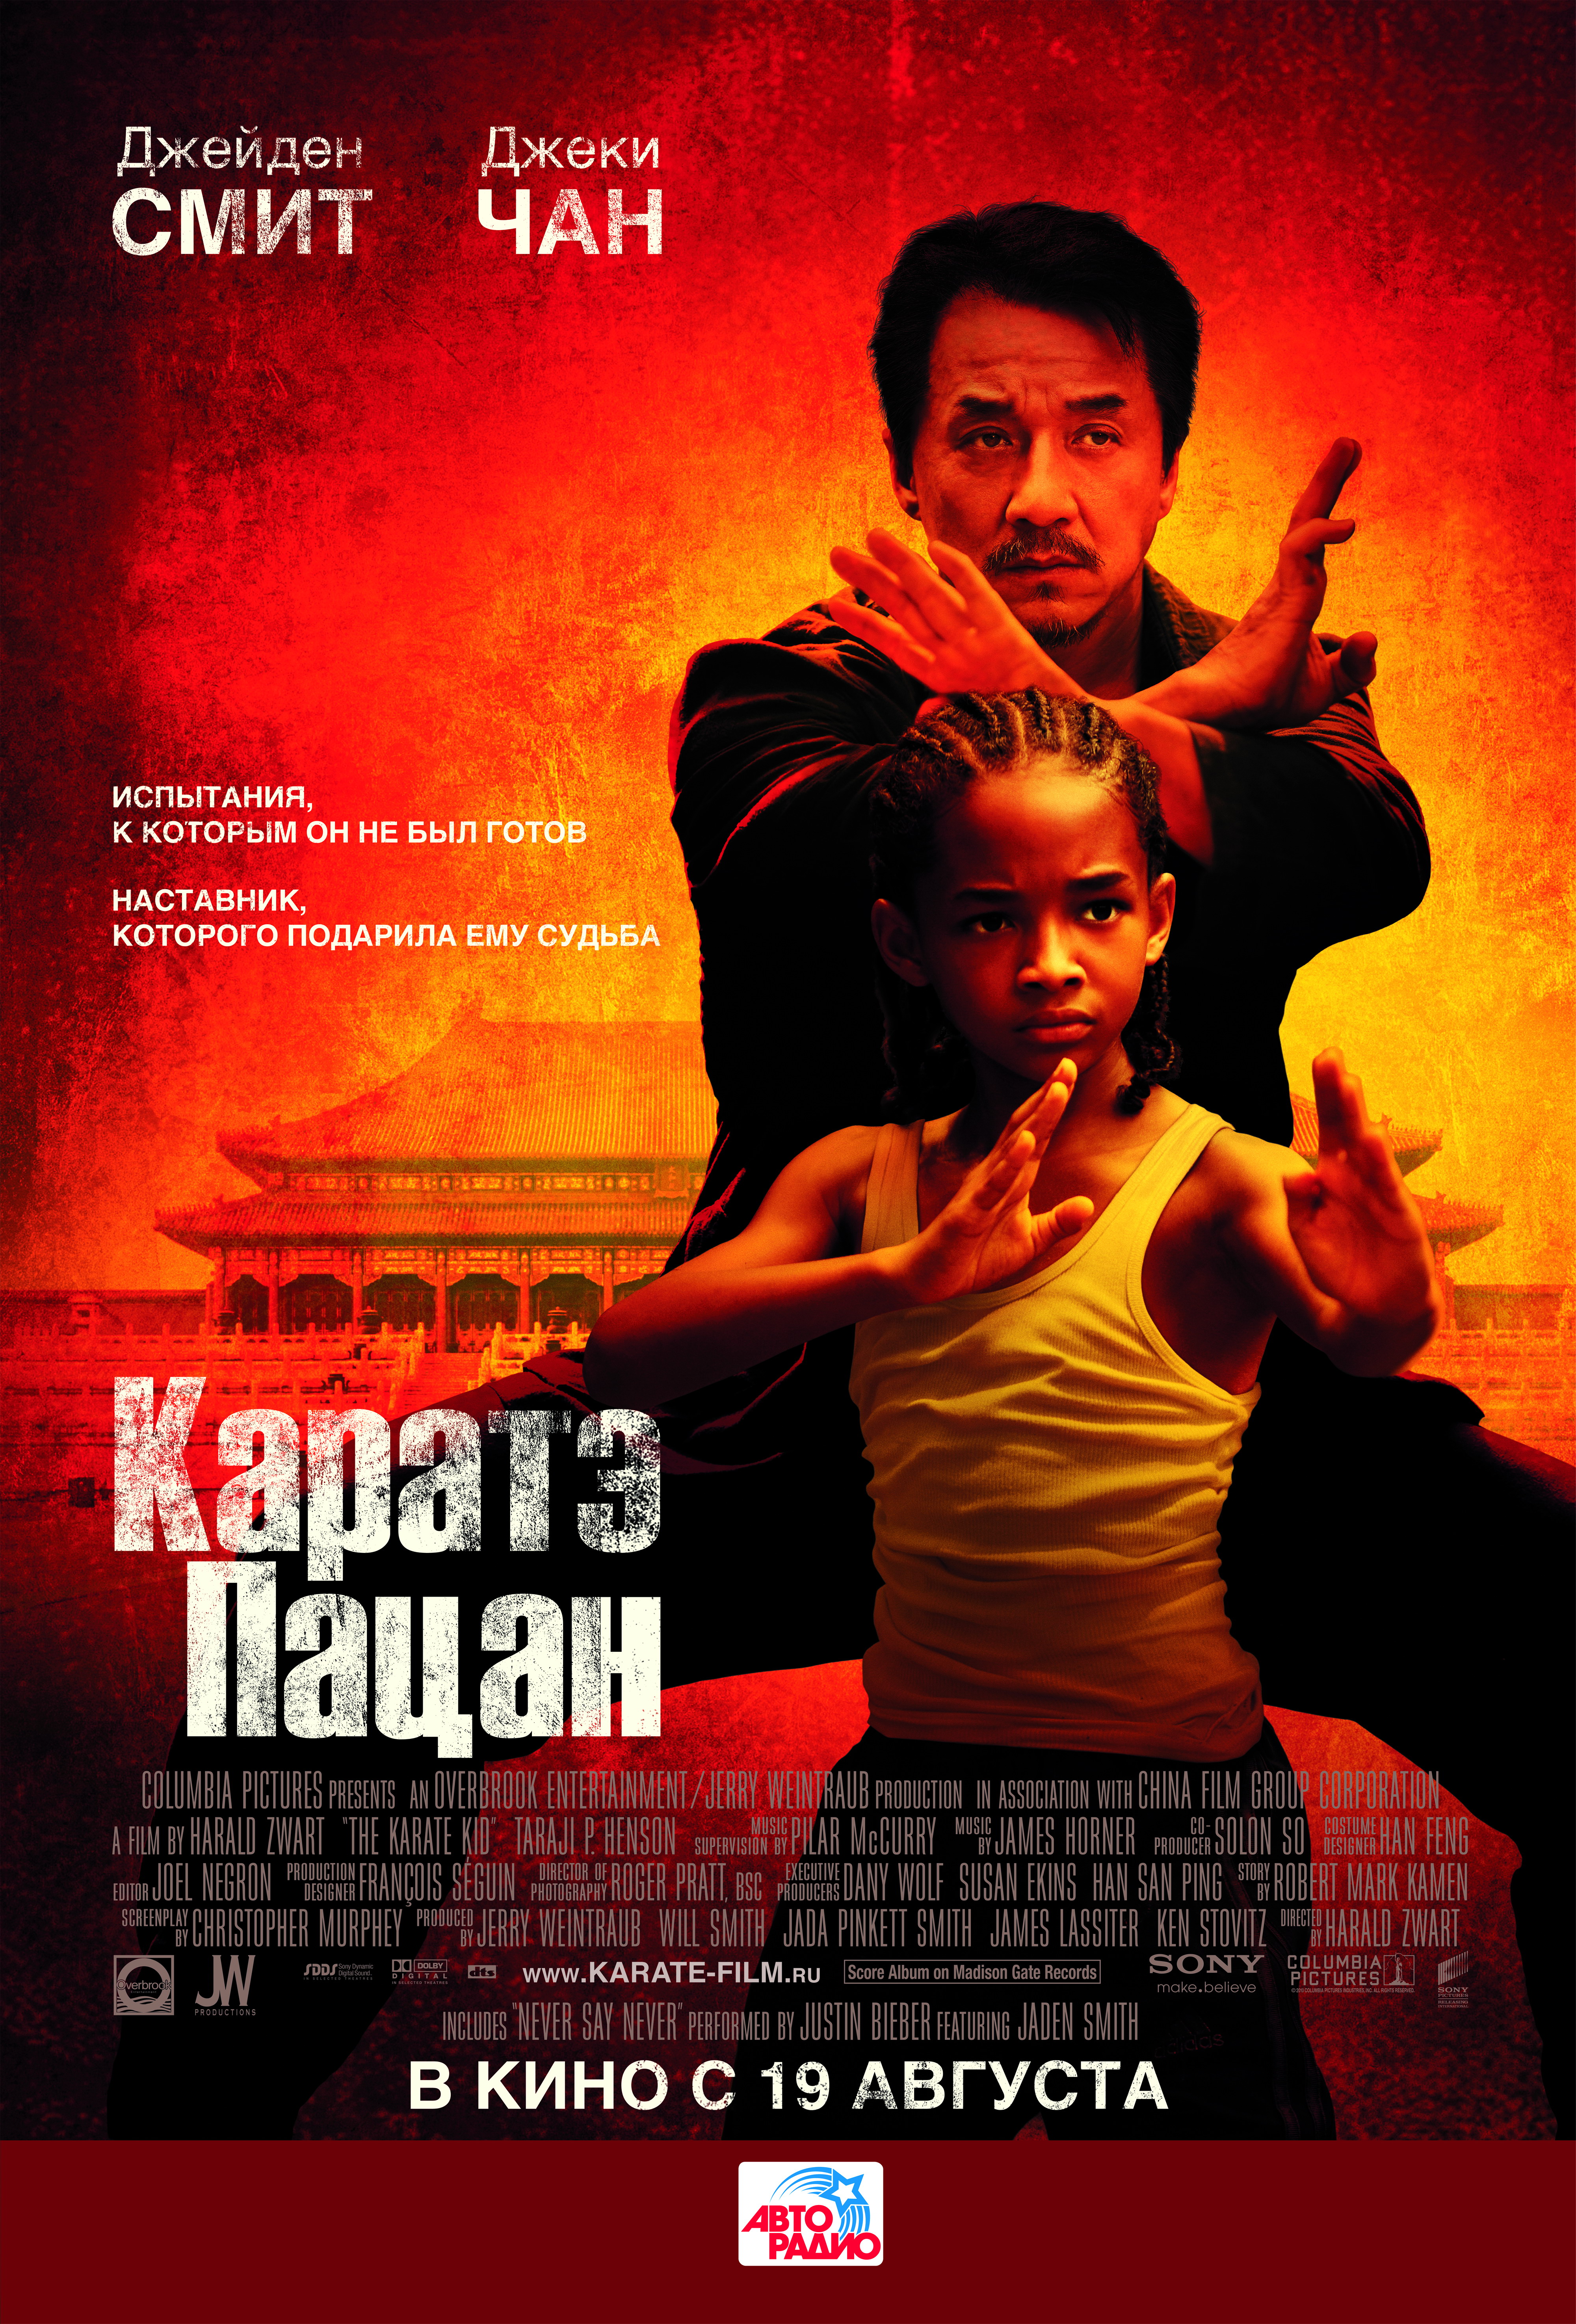 The Karate Kid 2010 English Dvdrip Xvid-master Release The Hounds